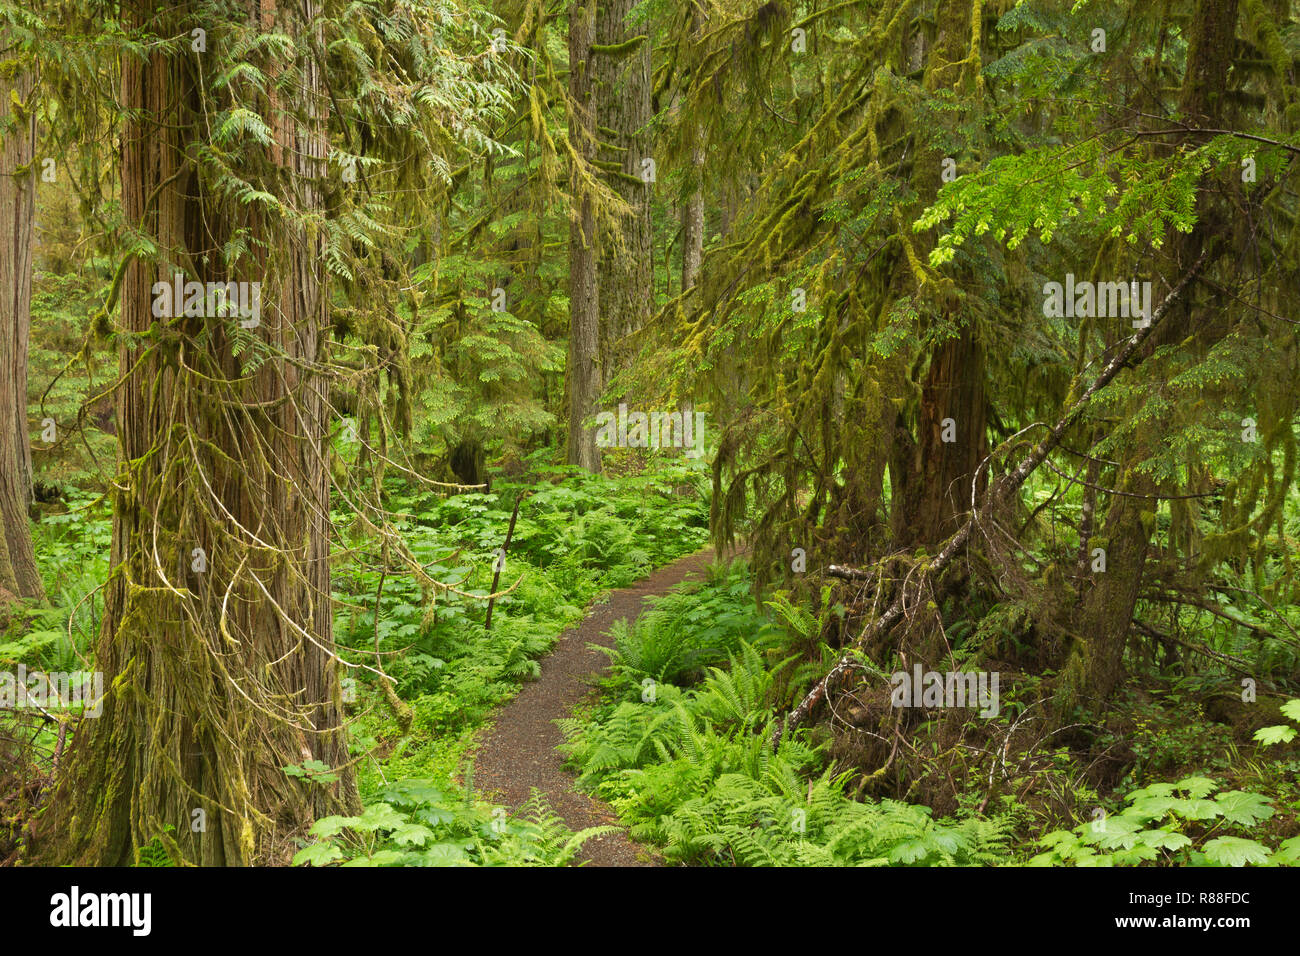 WA15507-00...WASHINGTON - Old Mine Trail accessed from the Carbon River Road/Trail winding through the temperate rain forest in Mount Rainier National Stock Photo